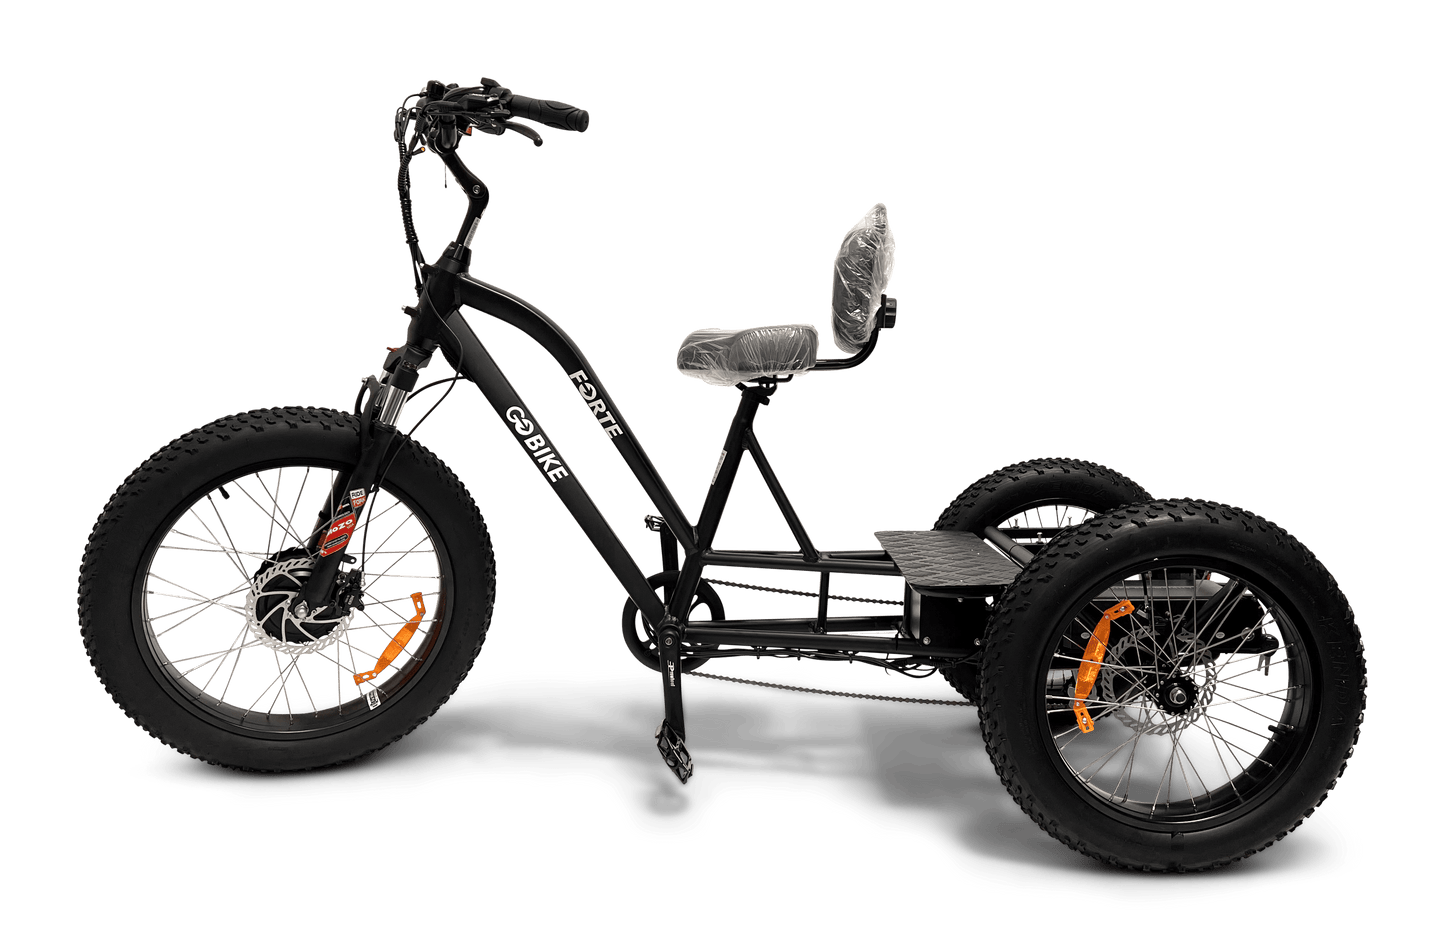 GOBIKE FORTE Electric Tricycle With Rear Seat